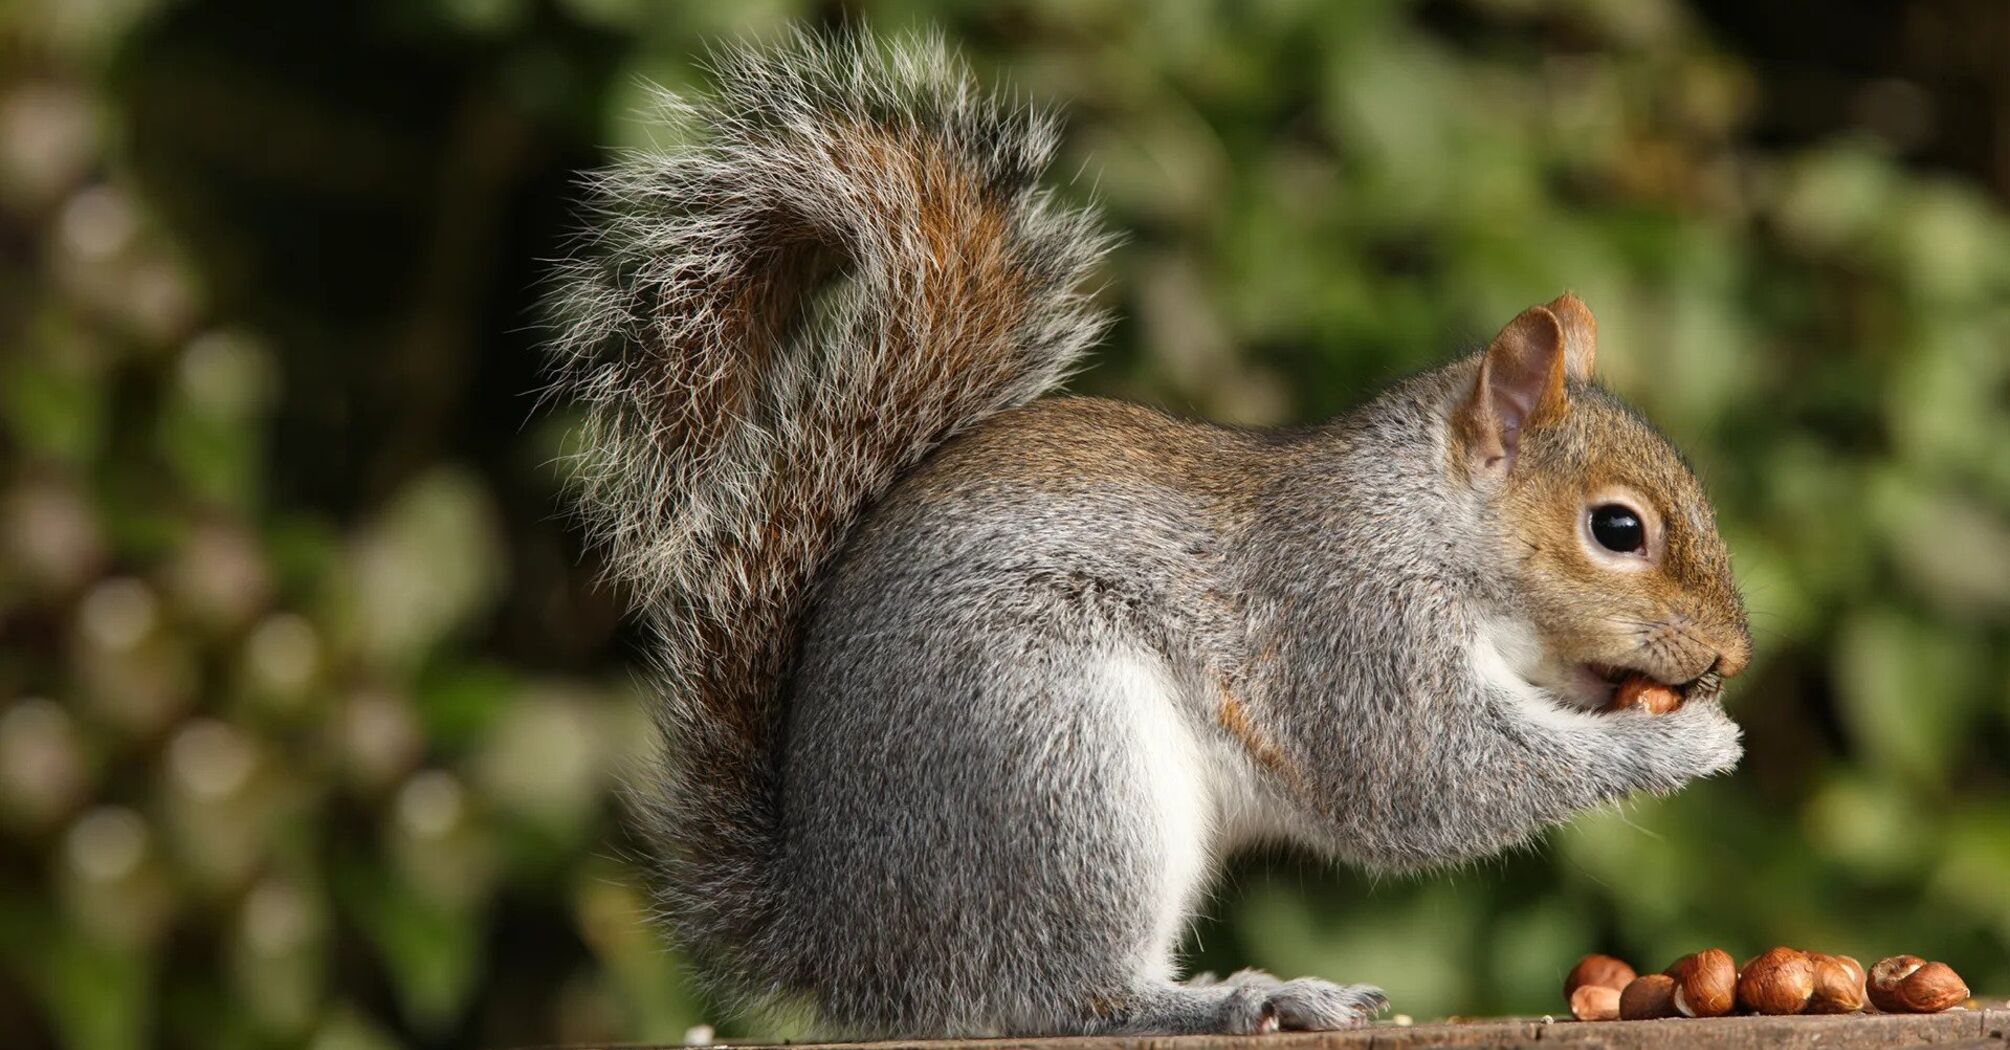 What can you treat squirrels with without harming their health